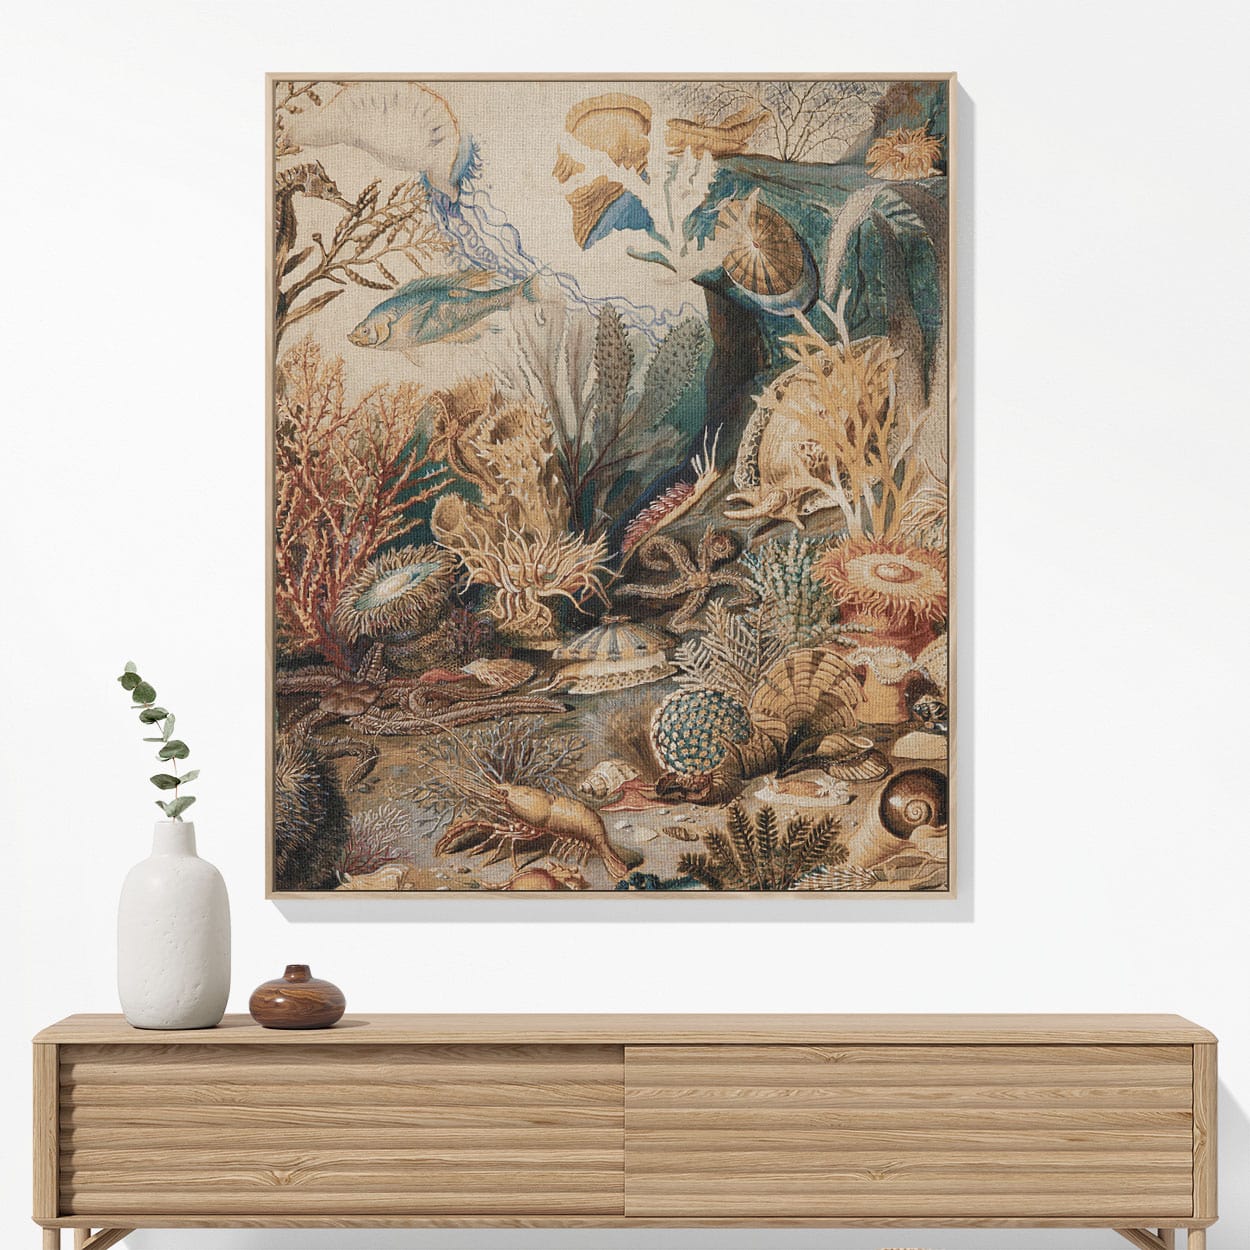 Under the Sea Woven Blanket Woven Blanket Hanging on a Wall as Framed Wall Art